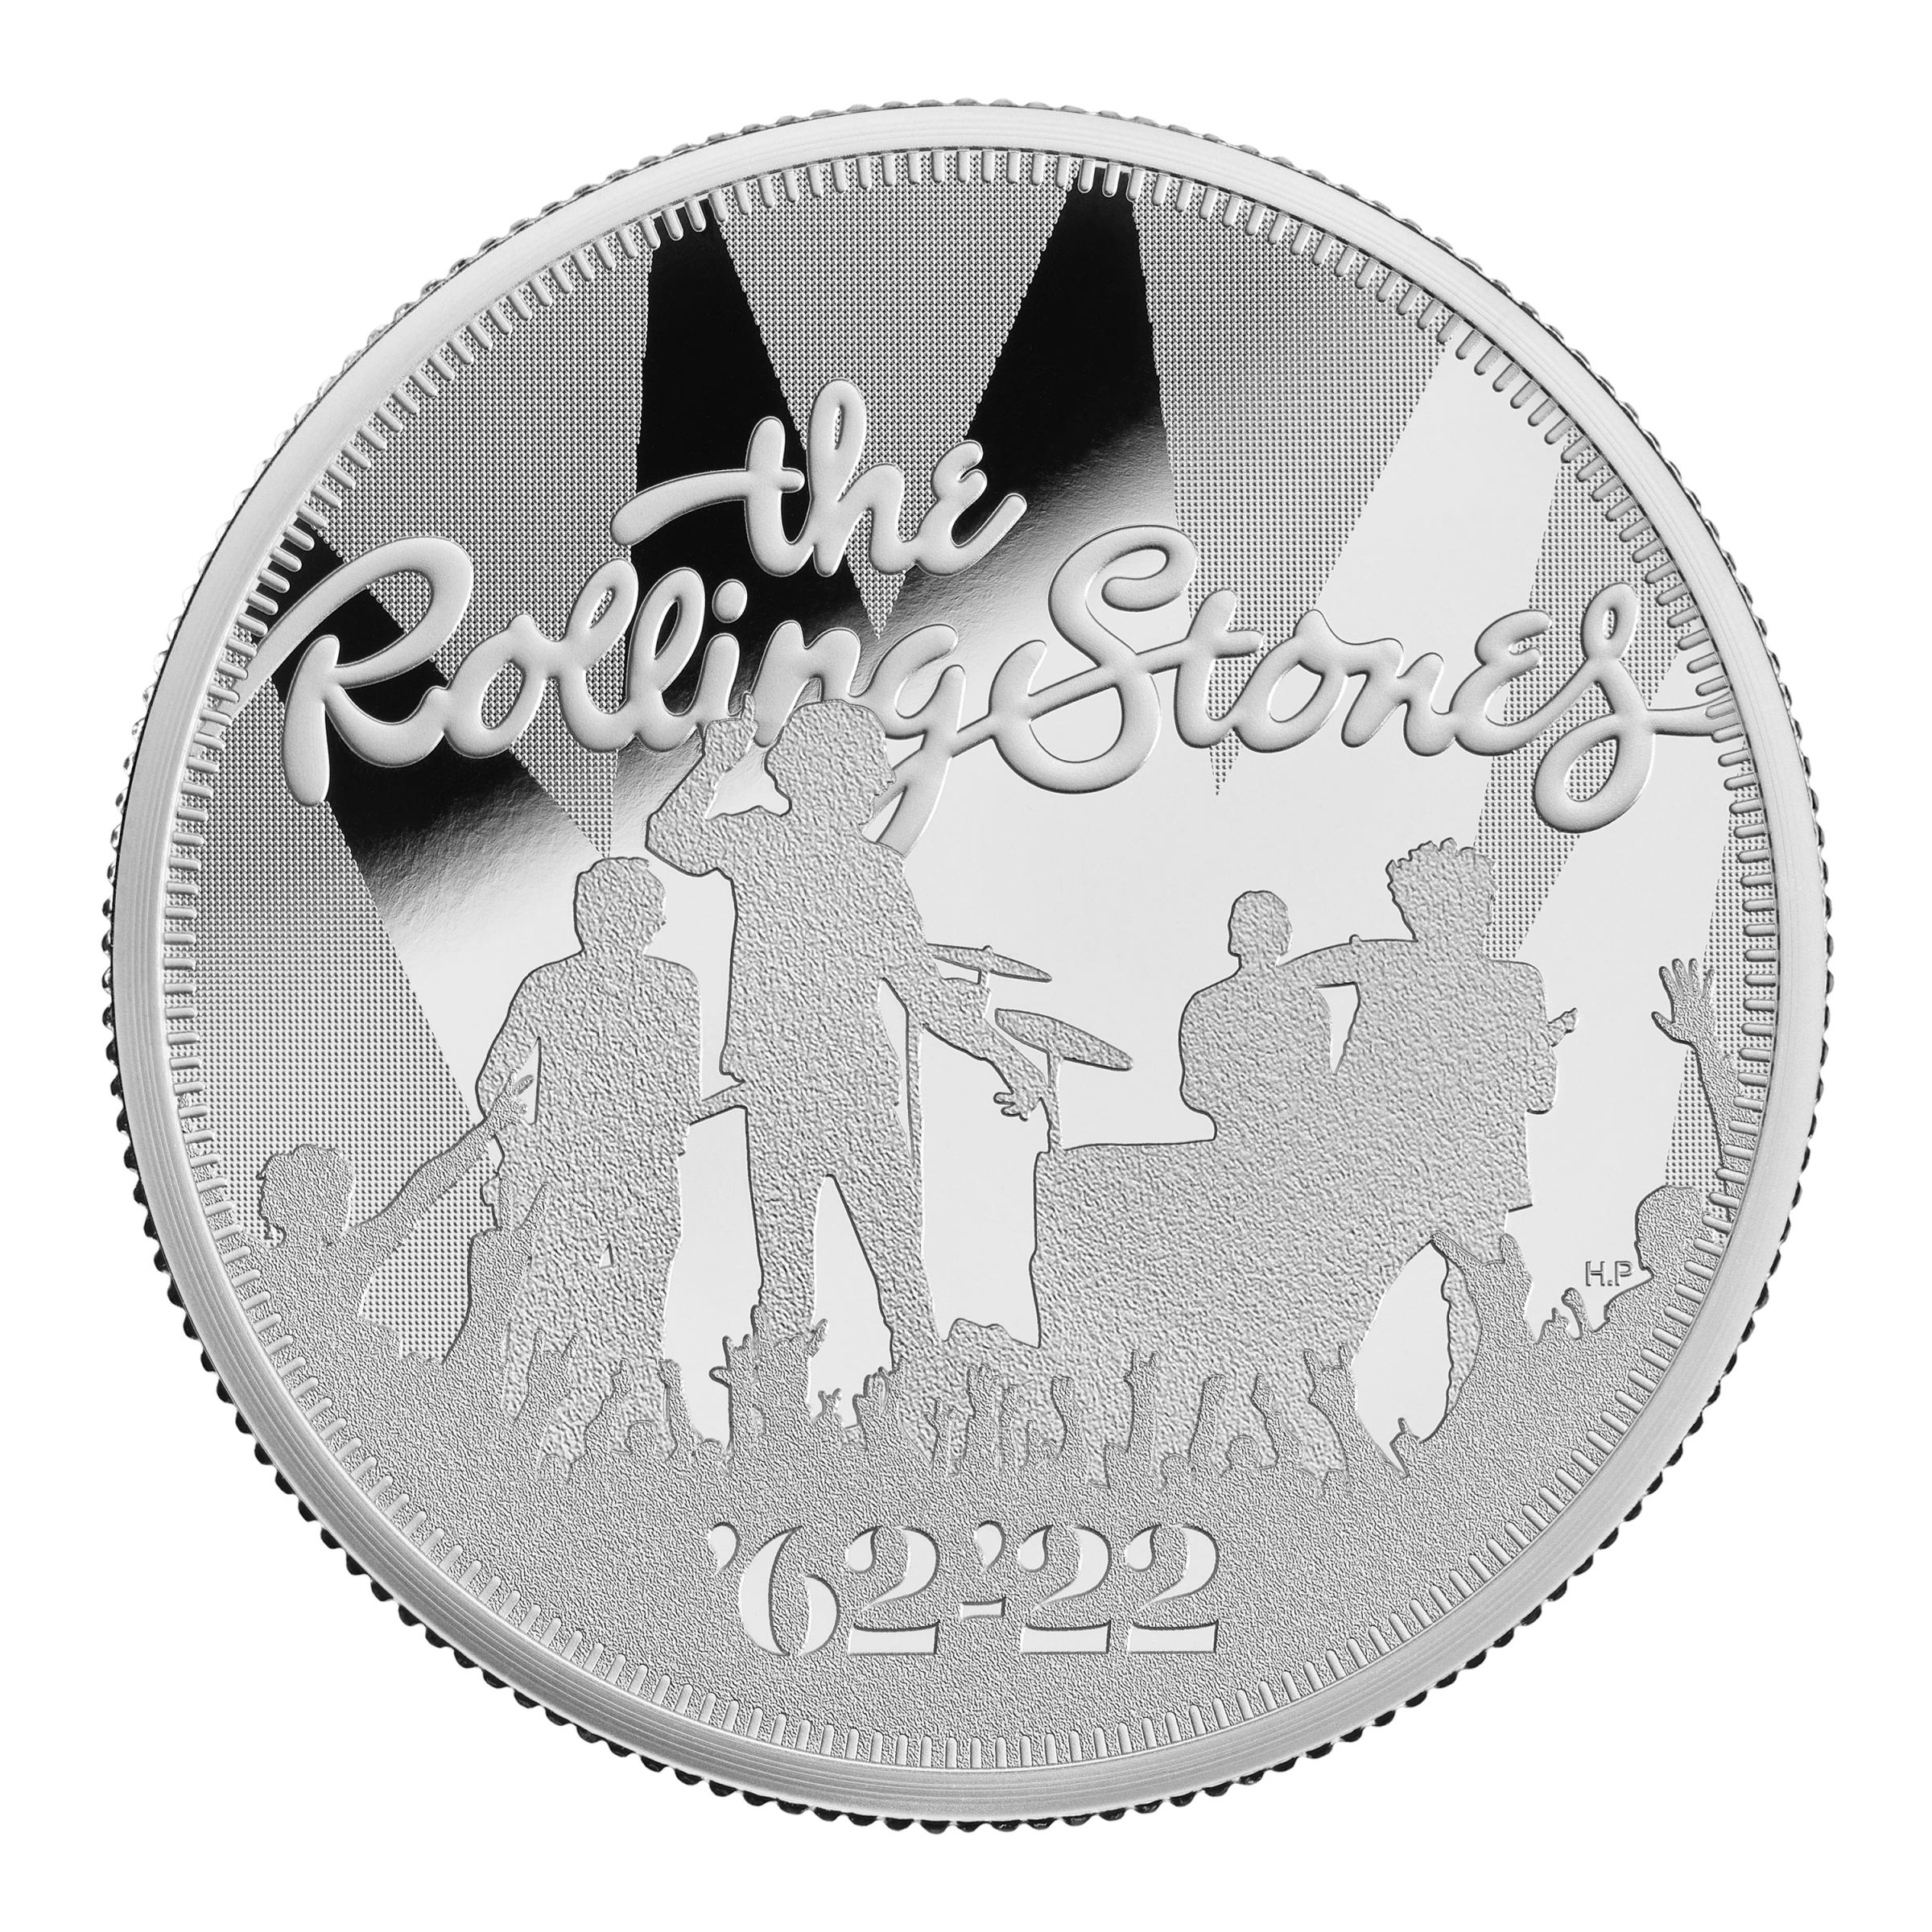 Royal Mint launches collectable coins for Rolling Stones anniversary